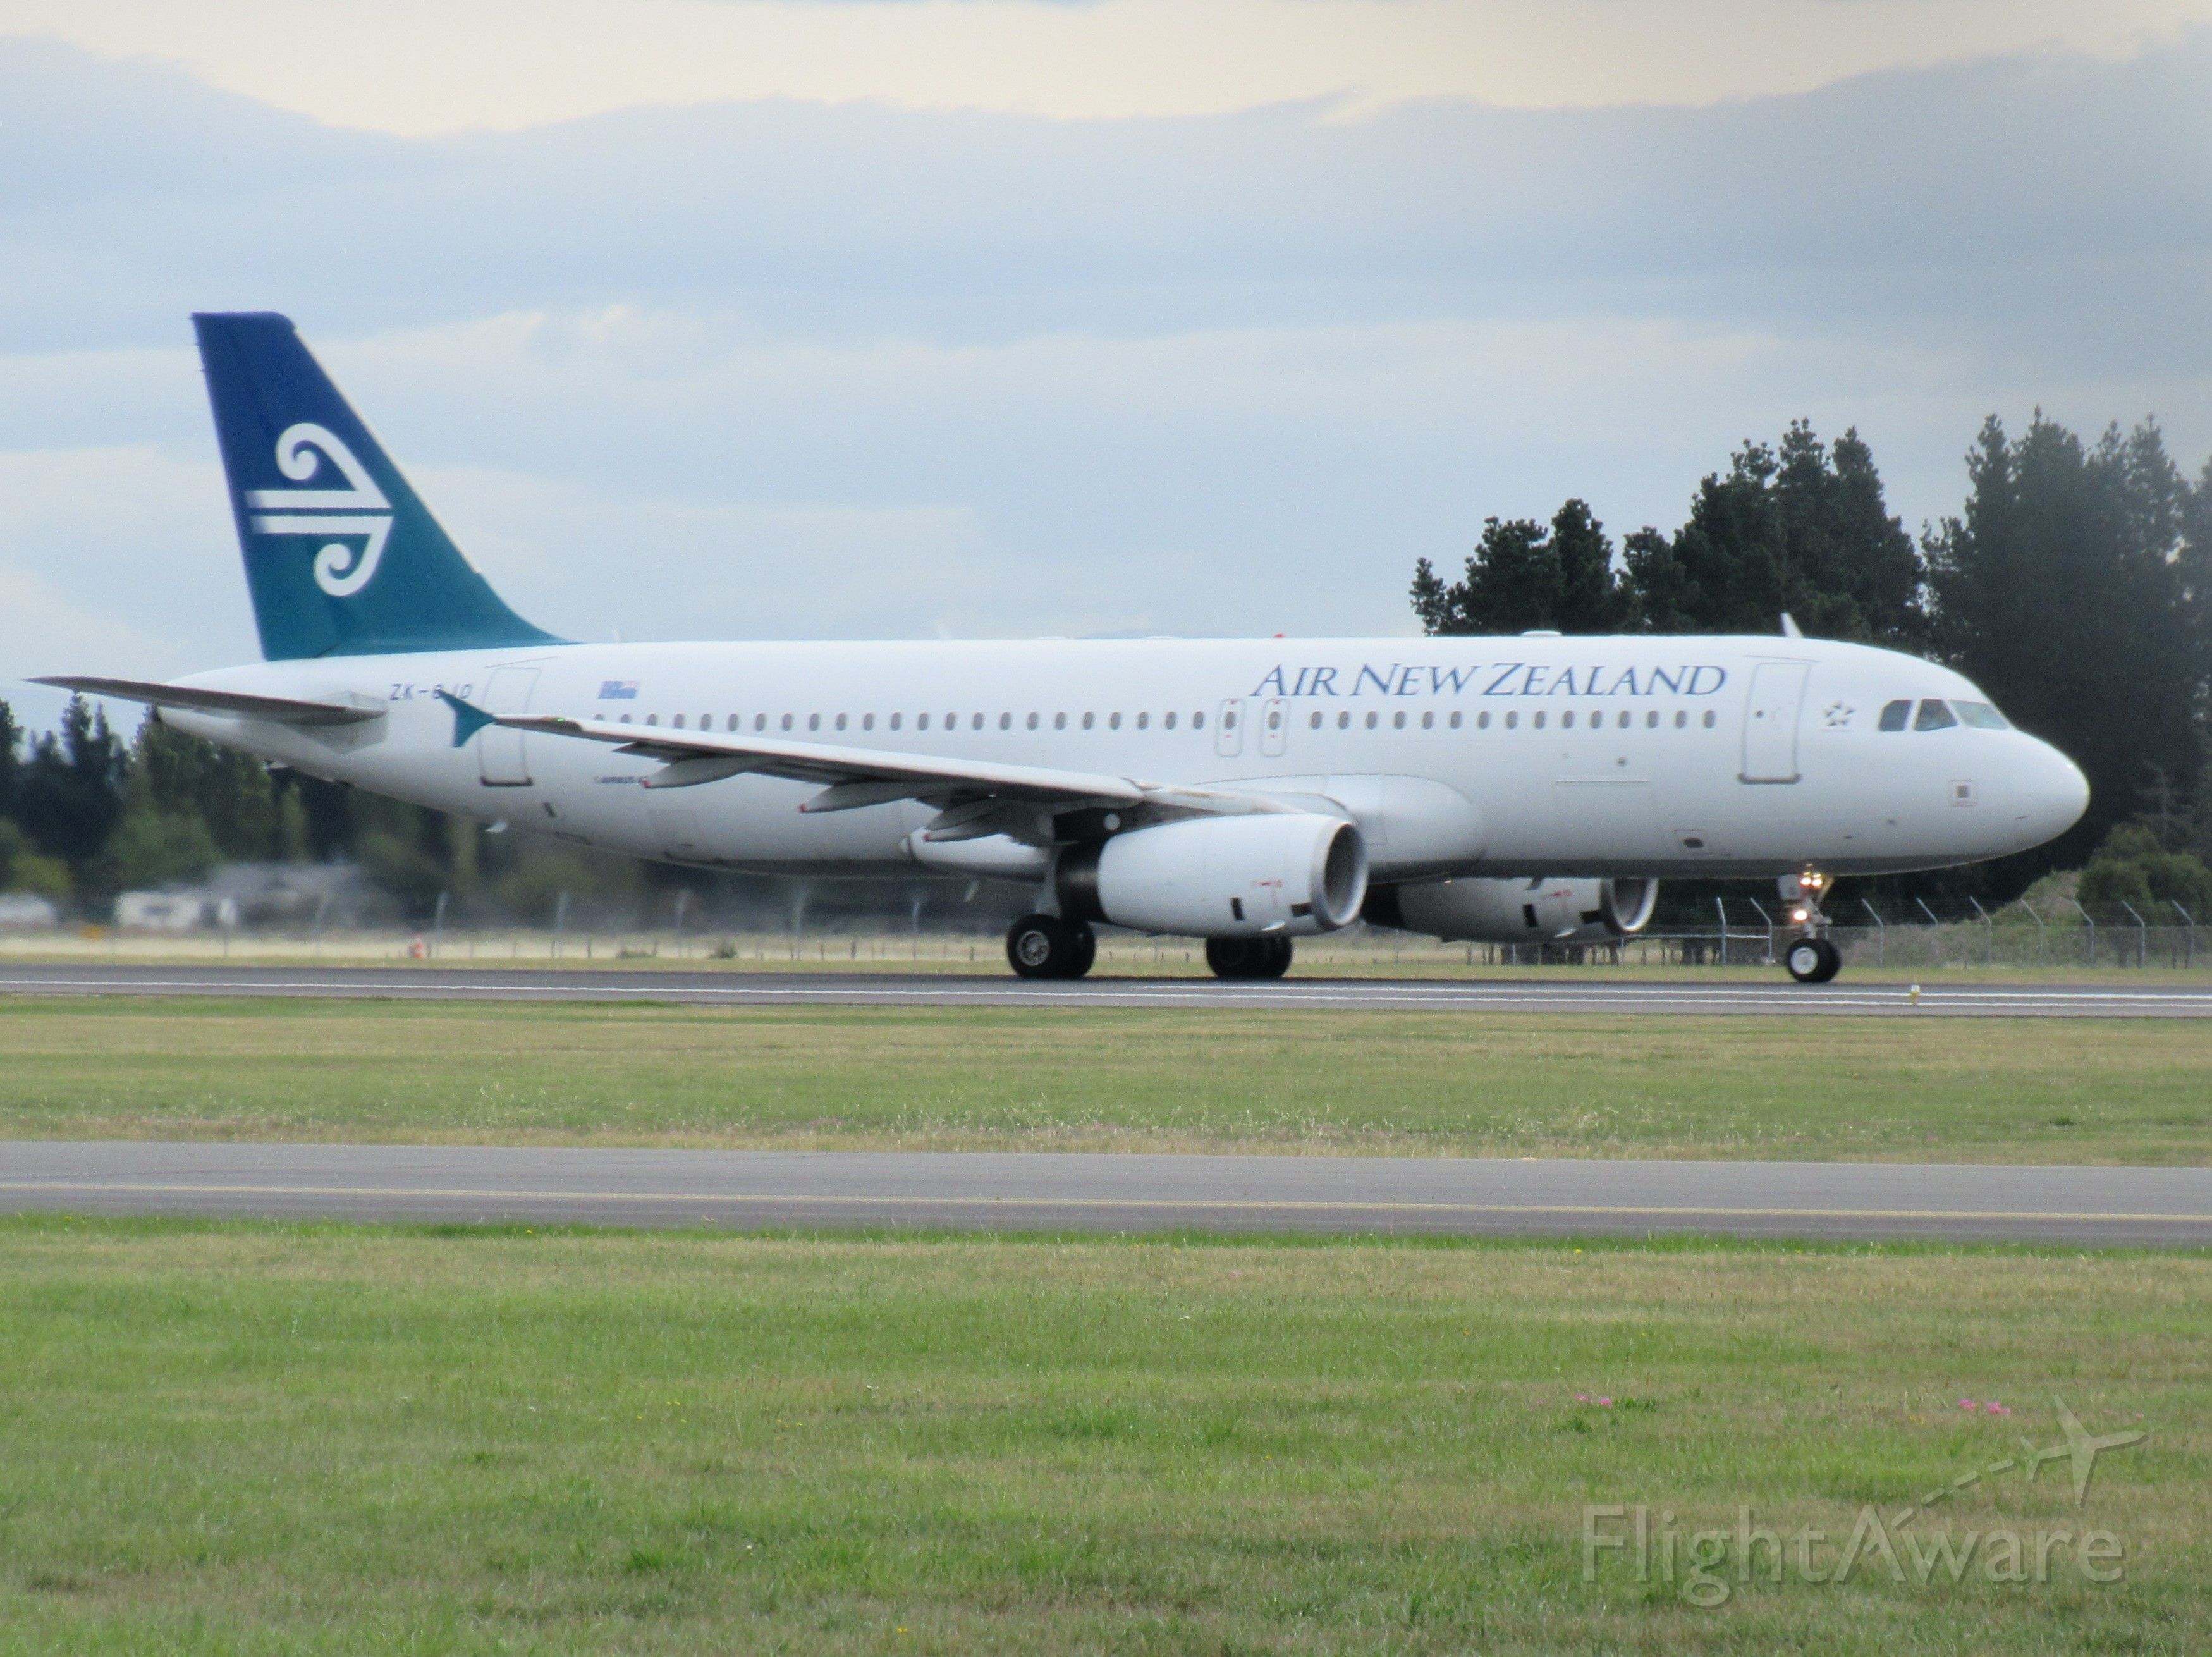 Airbus A320 (ZK-OJO) - This is the last old livery Air New Zealand A320 taking off.